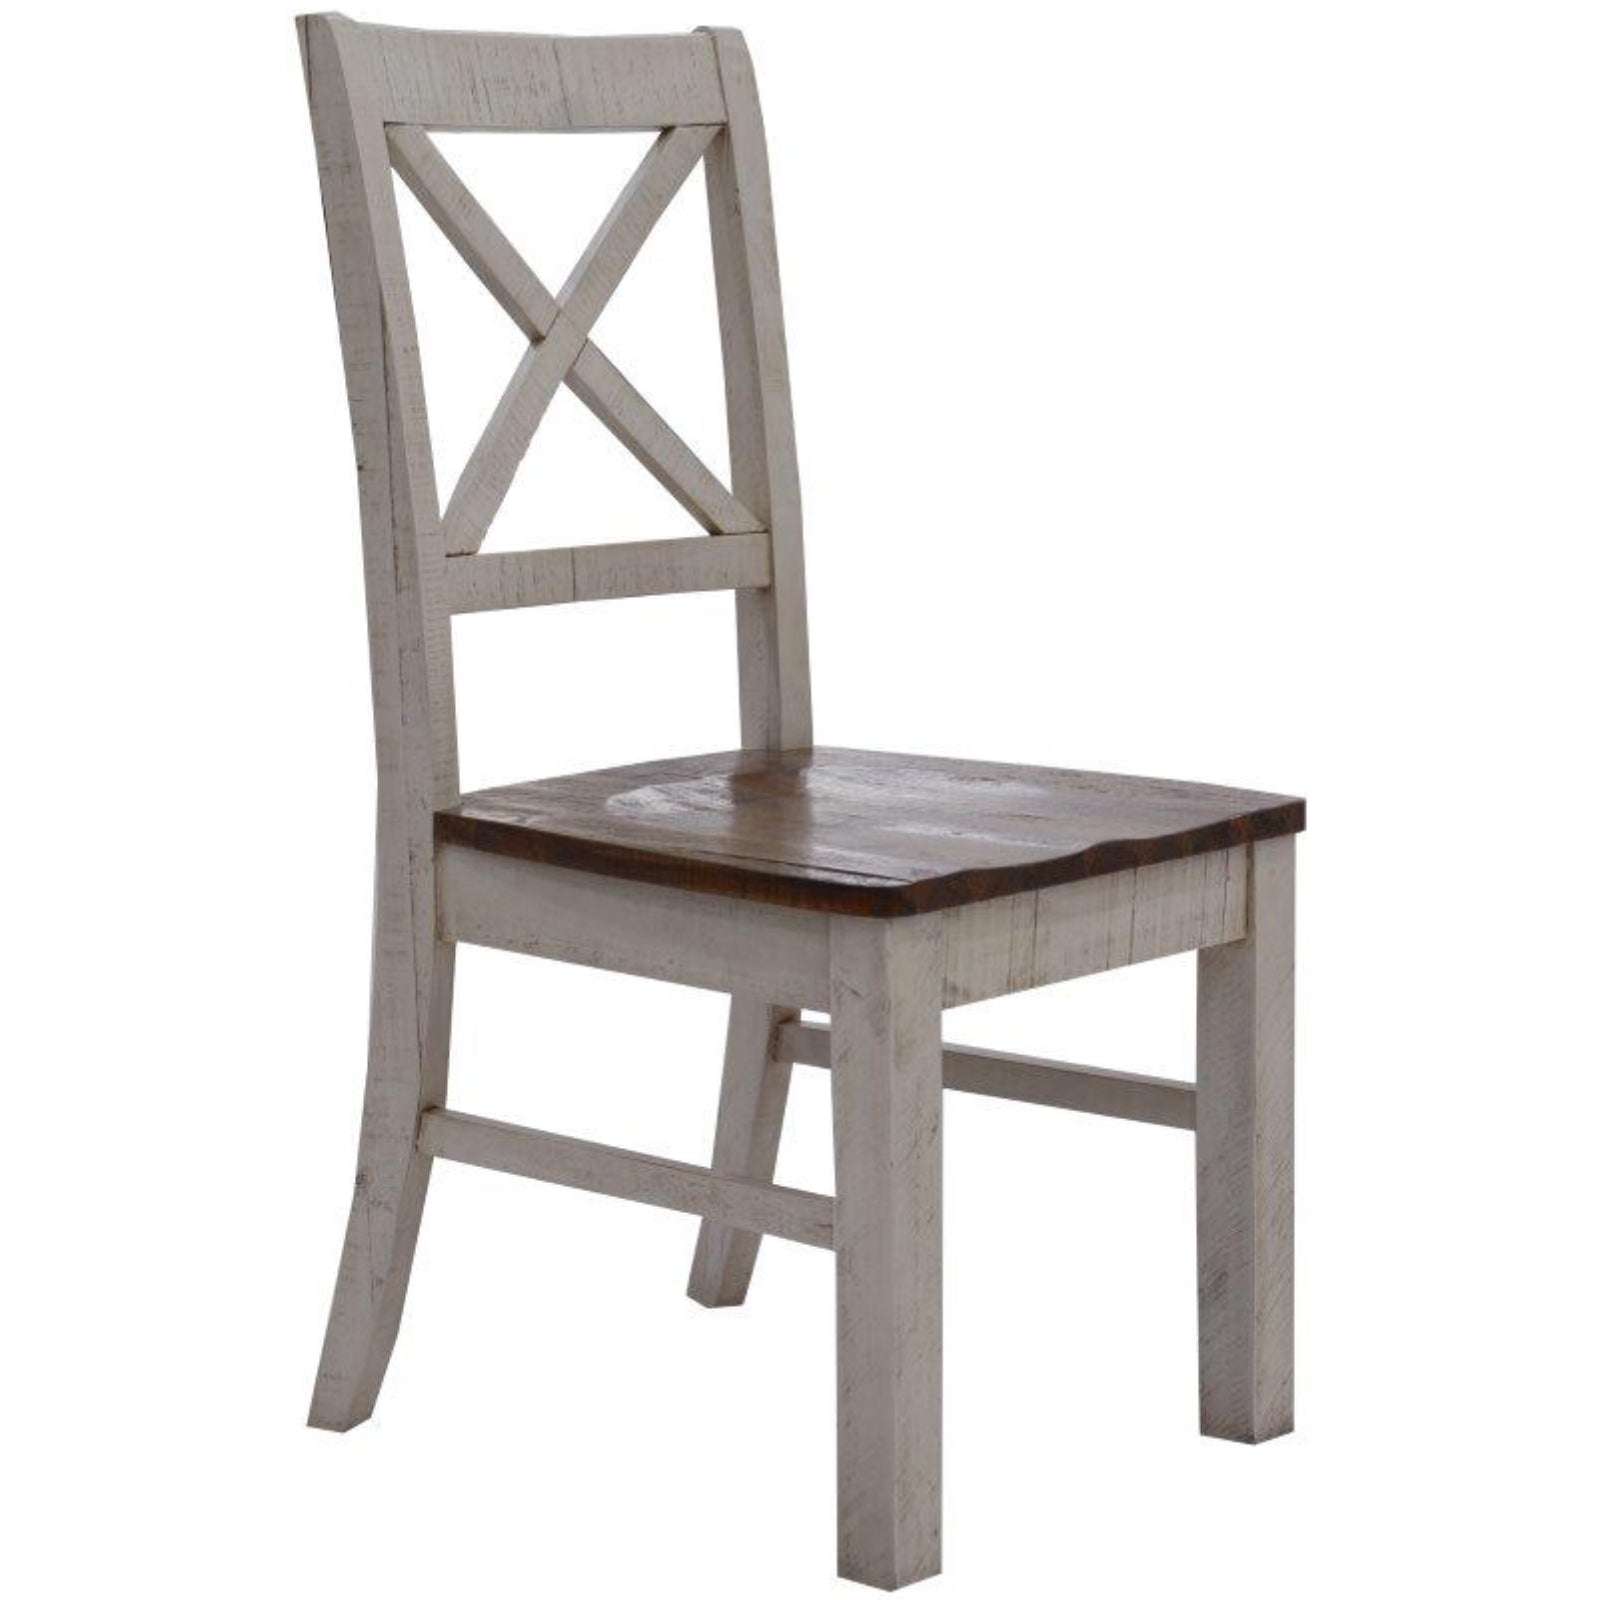 Erica X-Back Dining Chair Set of 2 Solid Acacia Timber Wood Hampton Brown White